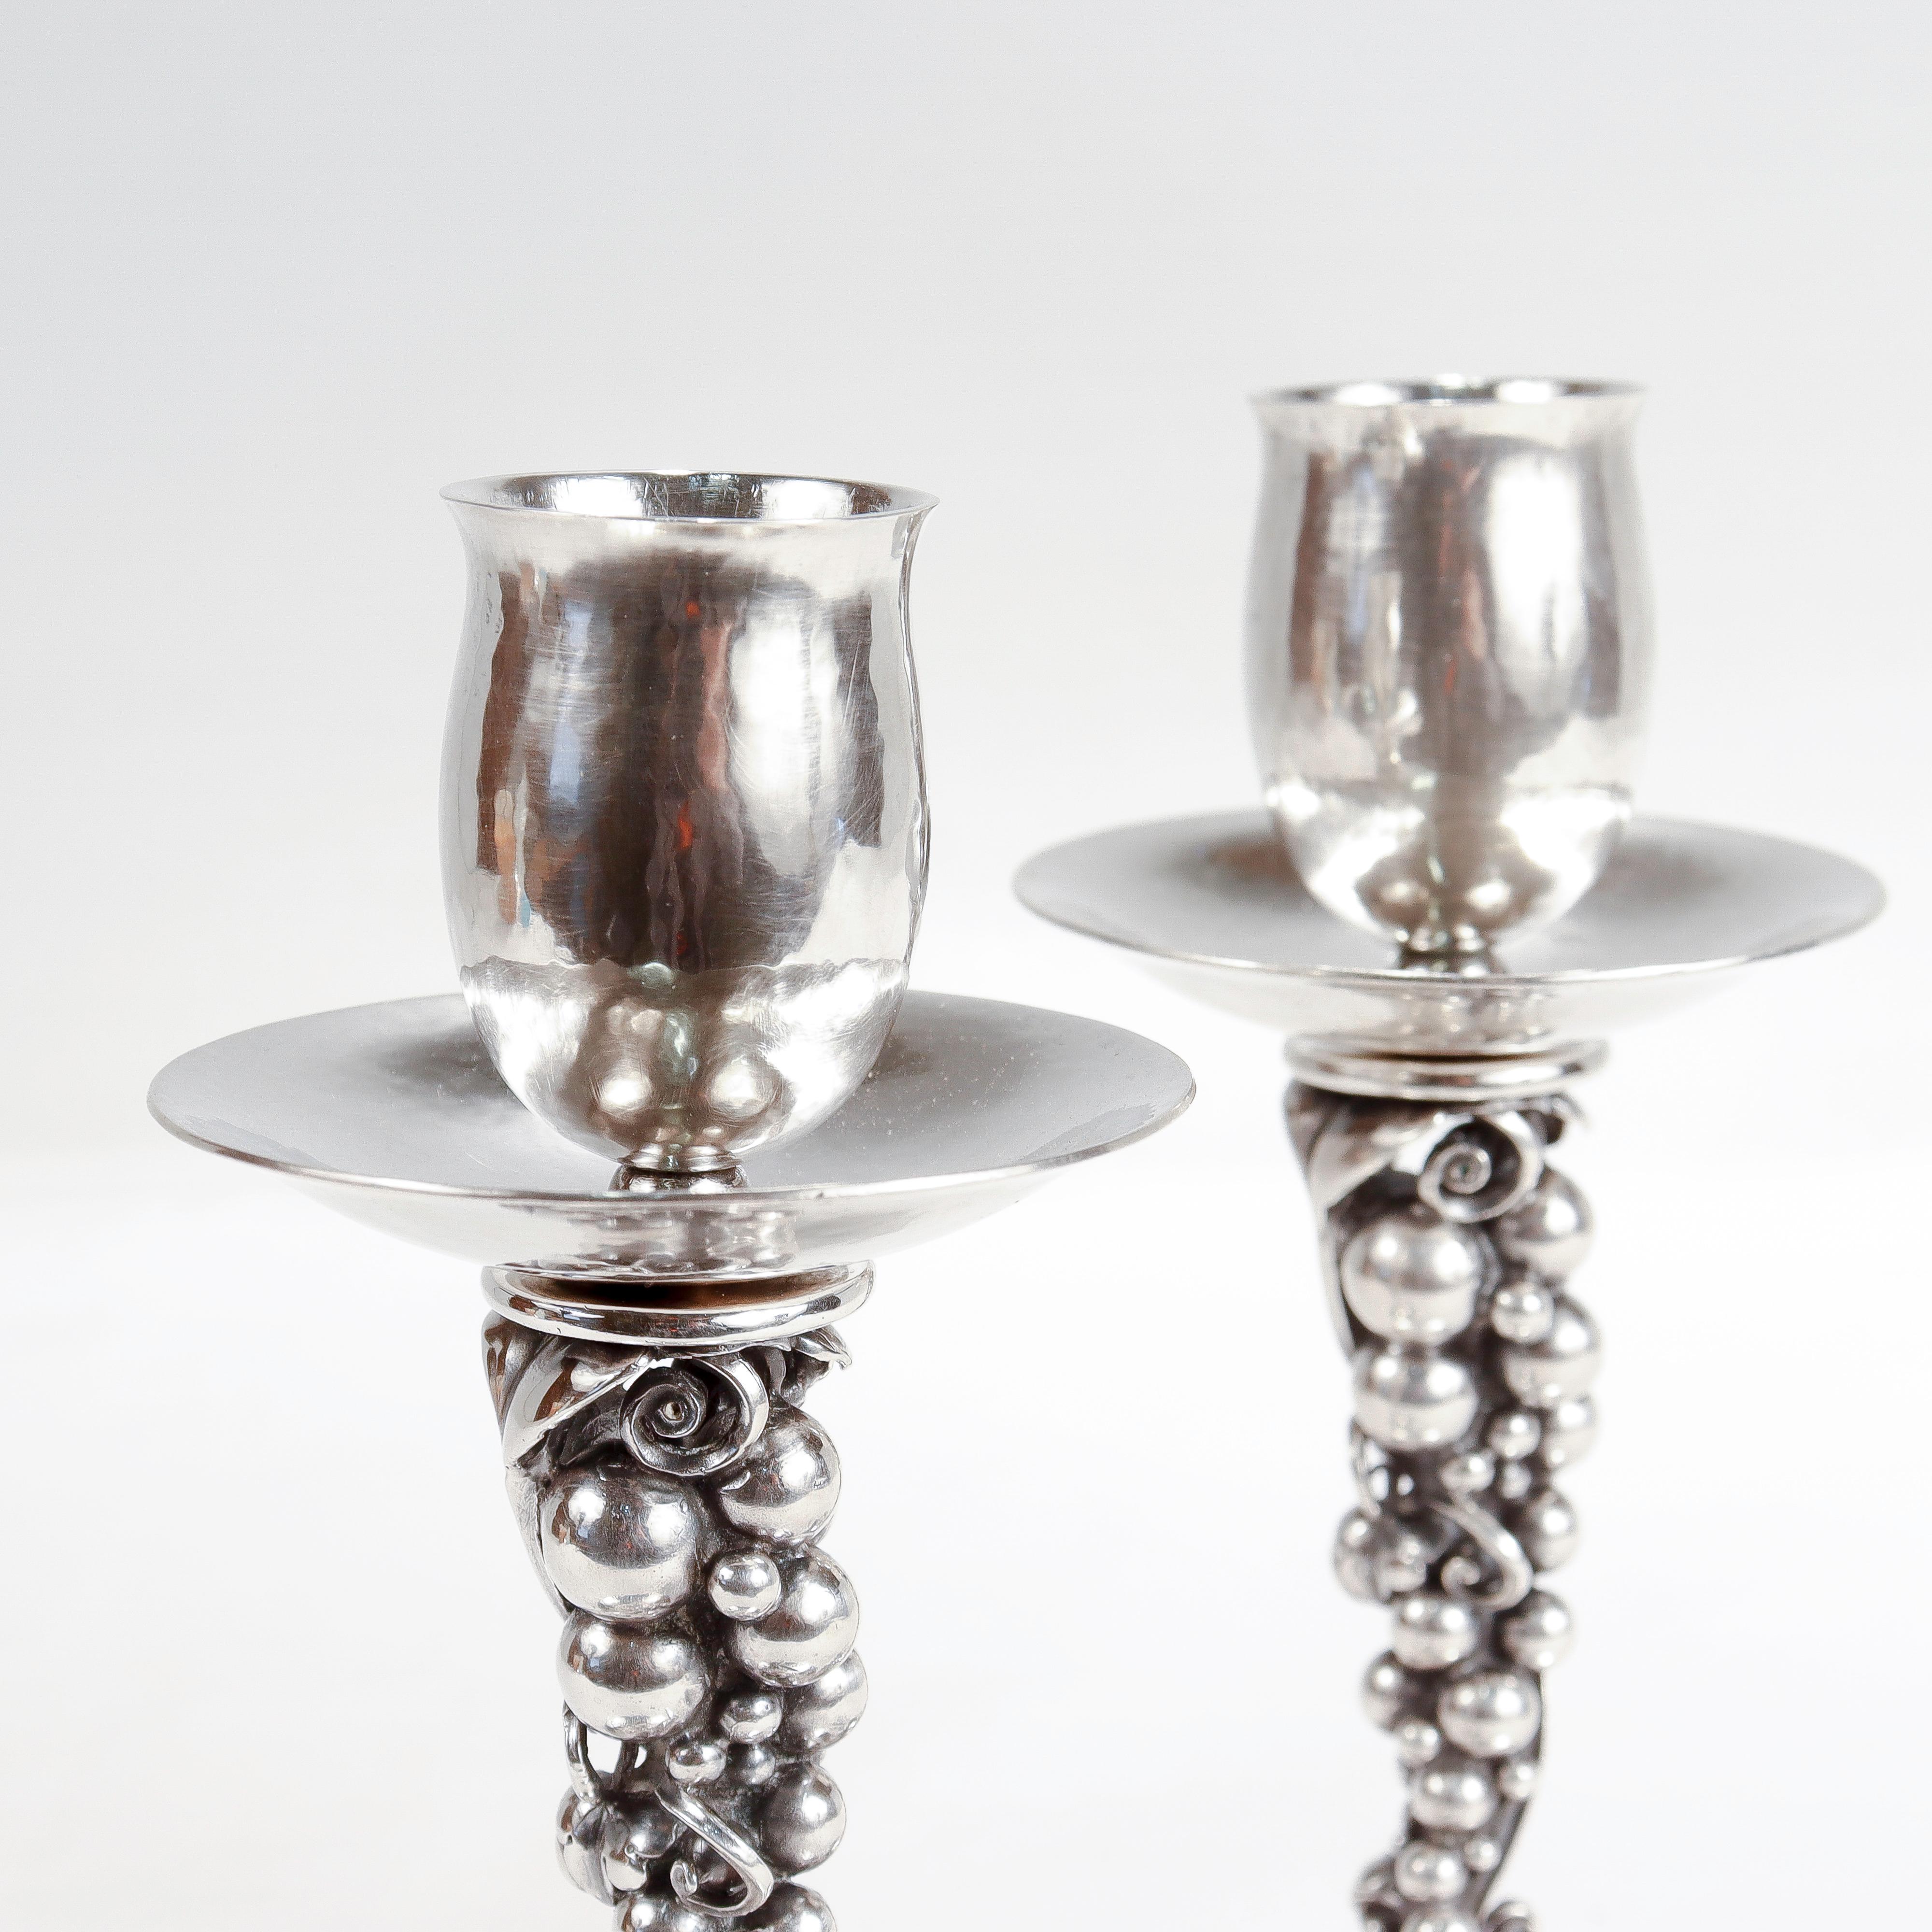 Pair of Signed Danish Modern Sterling Silver Grapes Candlesticks by Aage Weimar For Sale 2